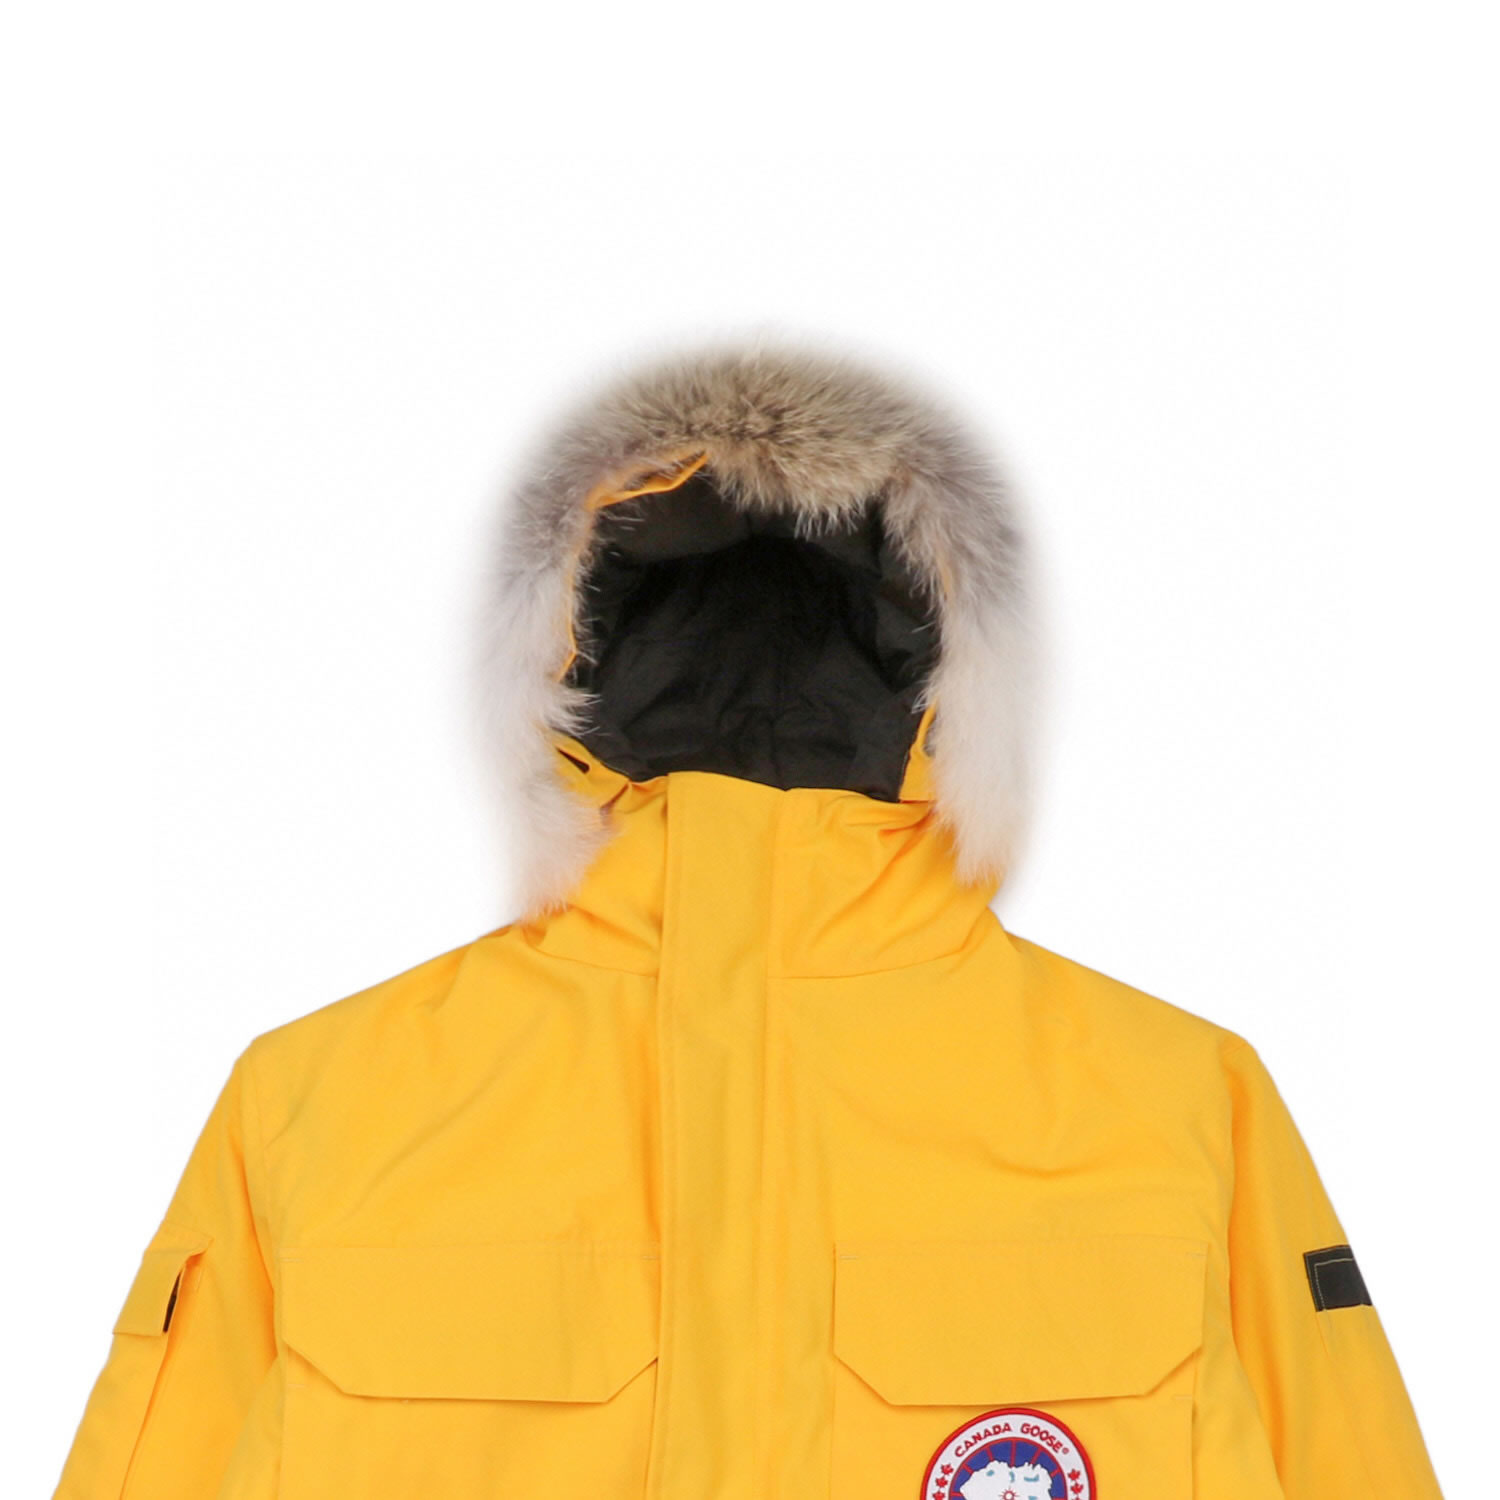 08 Canada Goose 19fw Expedition 4660ma Down Jacket Coat Yellow (4) - newkick.org